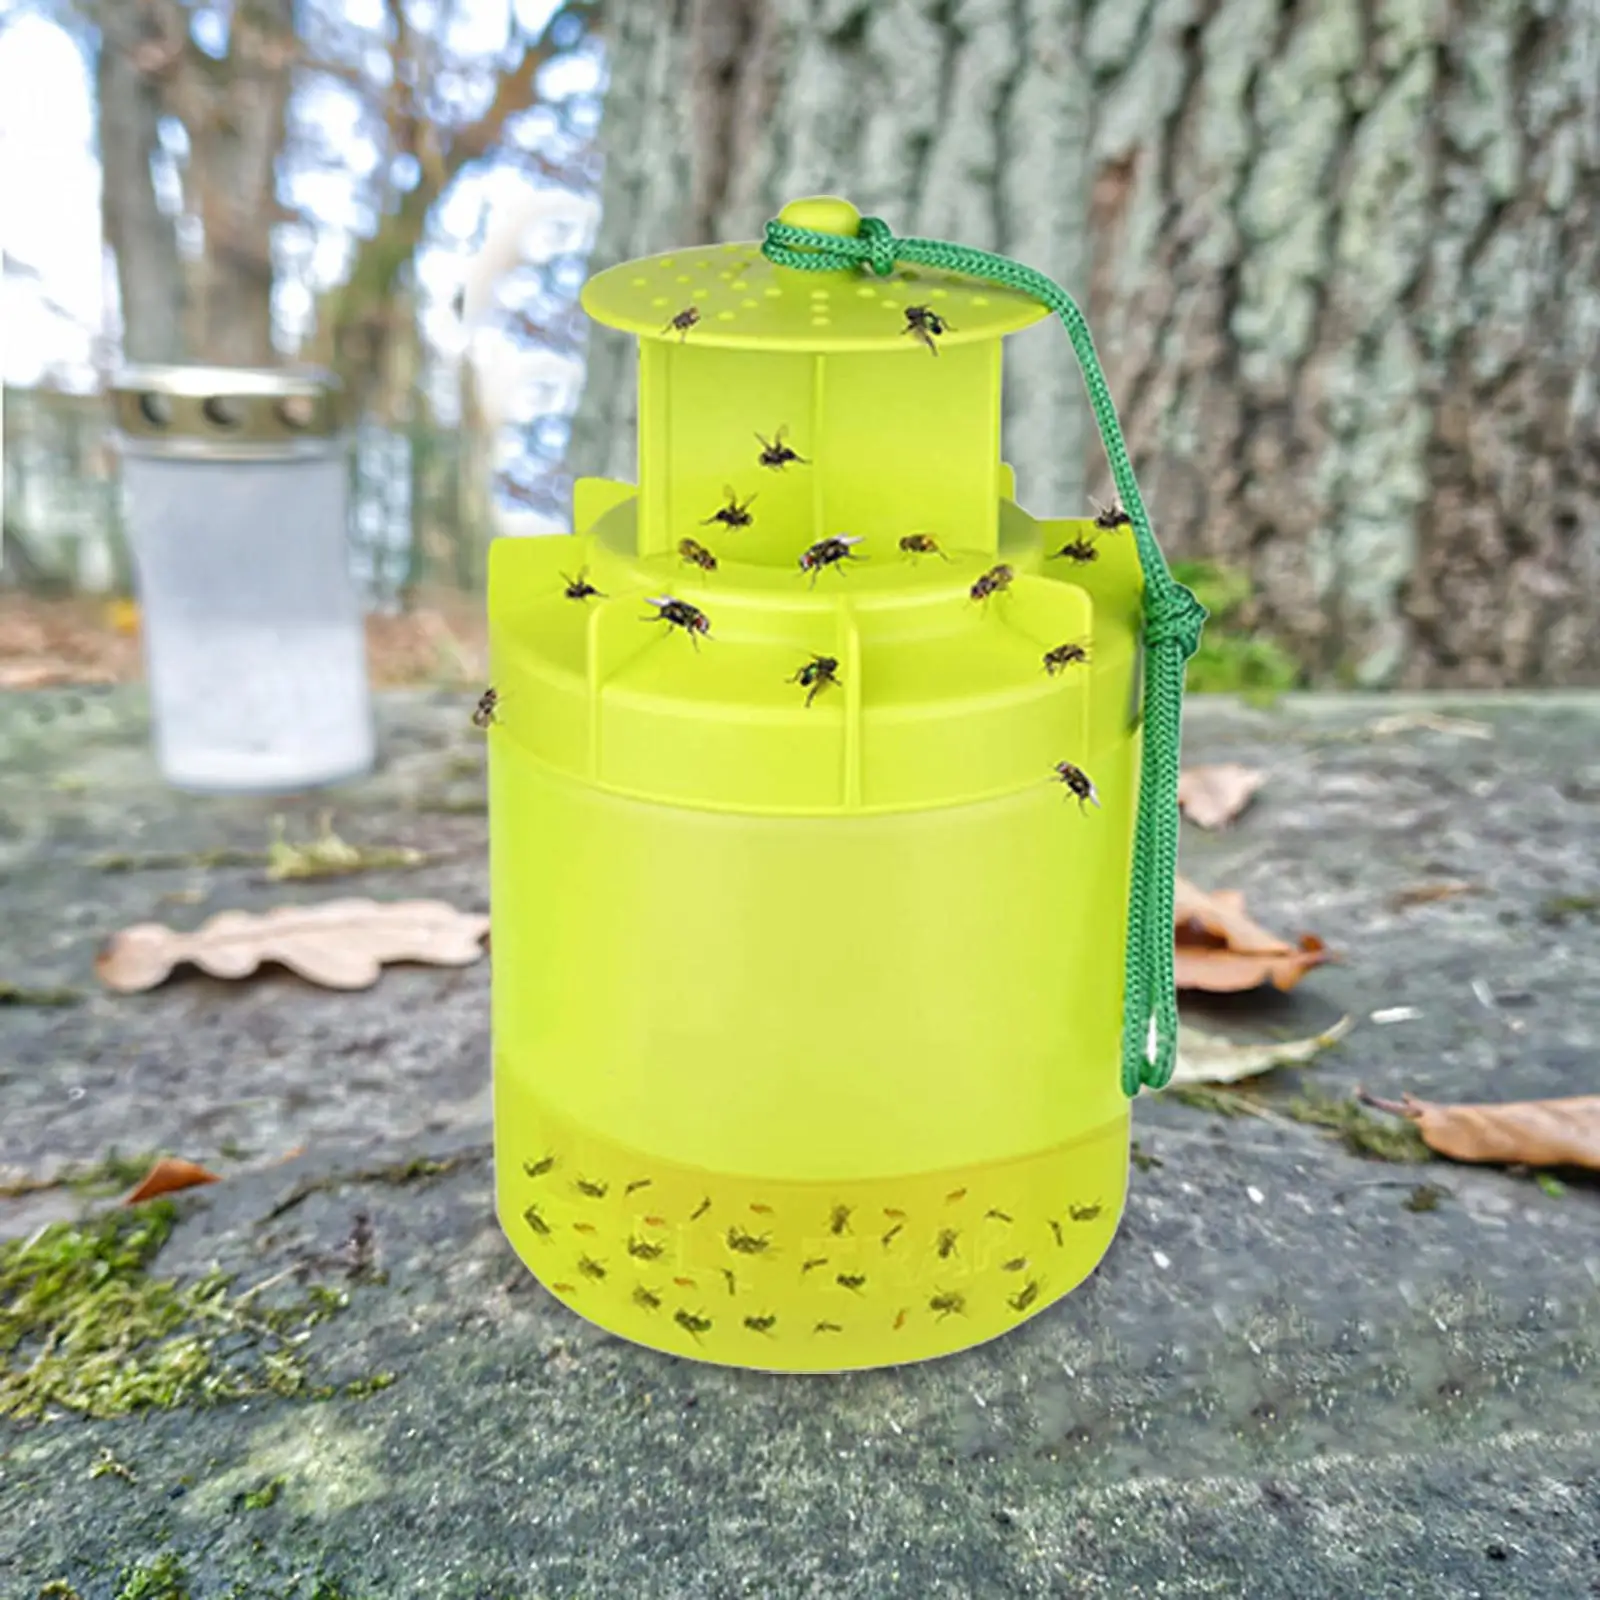 Wasp Outdoor Hanging Wasp Repellence Outdoor Orchards Highly Effective Portable Reusable Farm Outdoor Hanging Bee Catcher